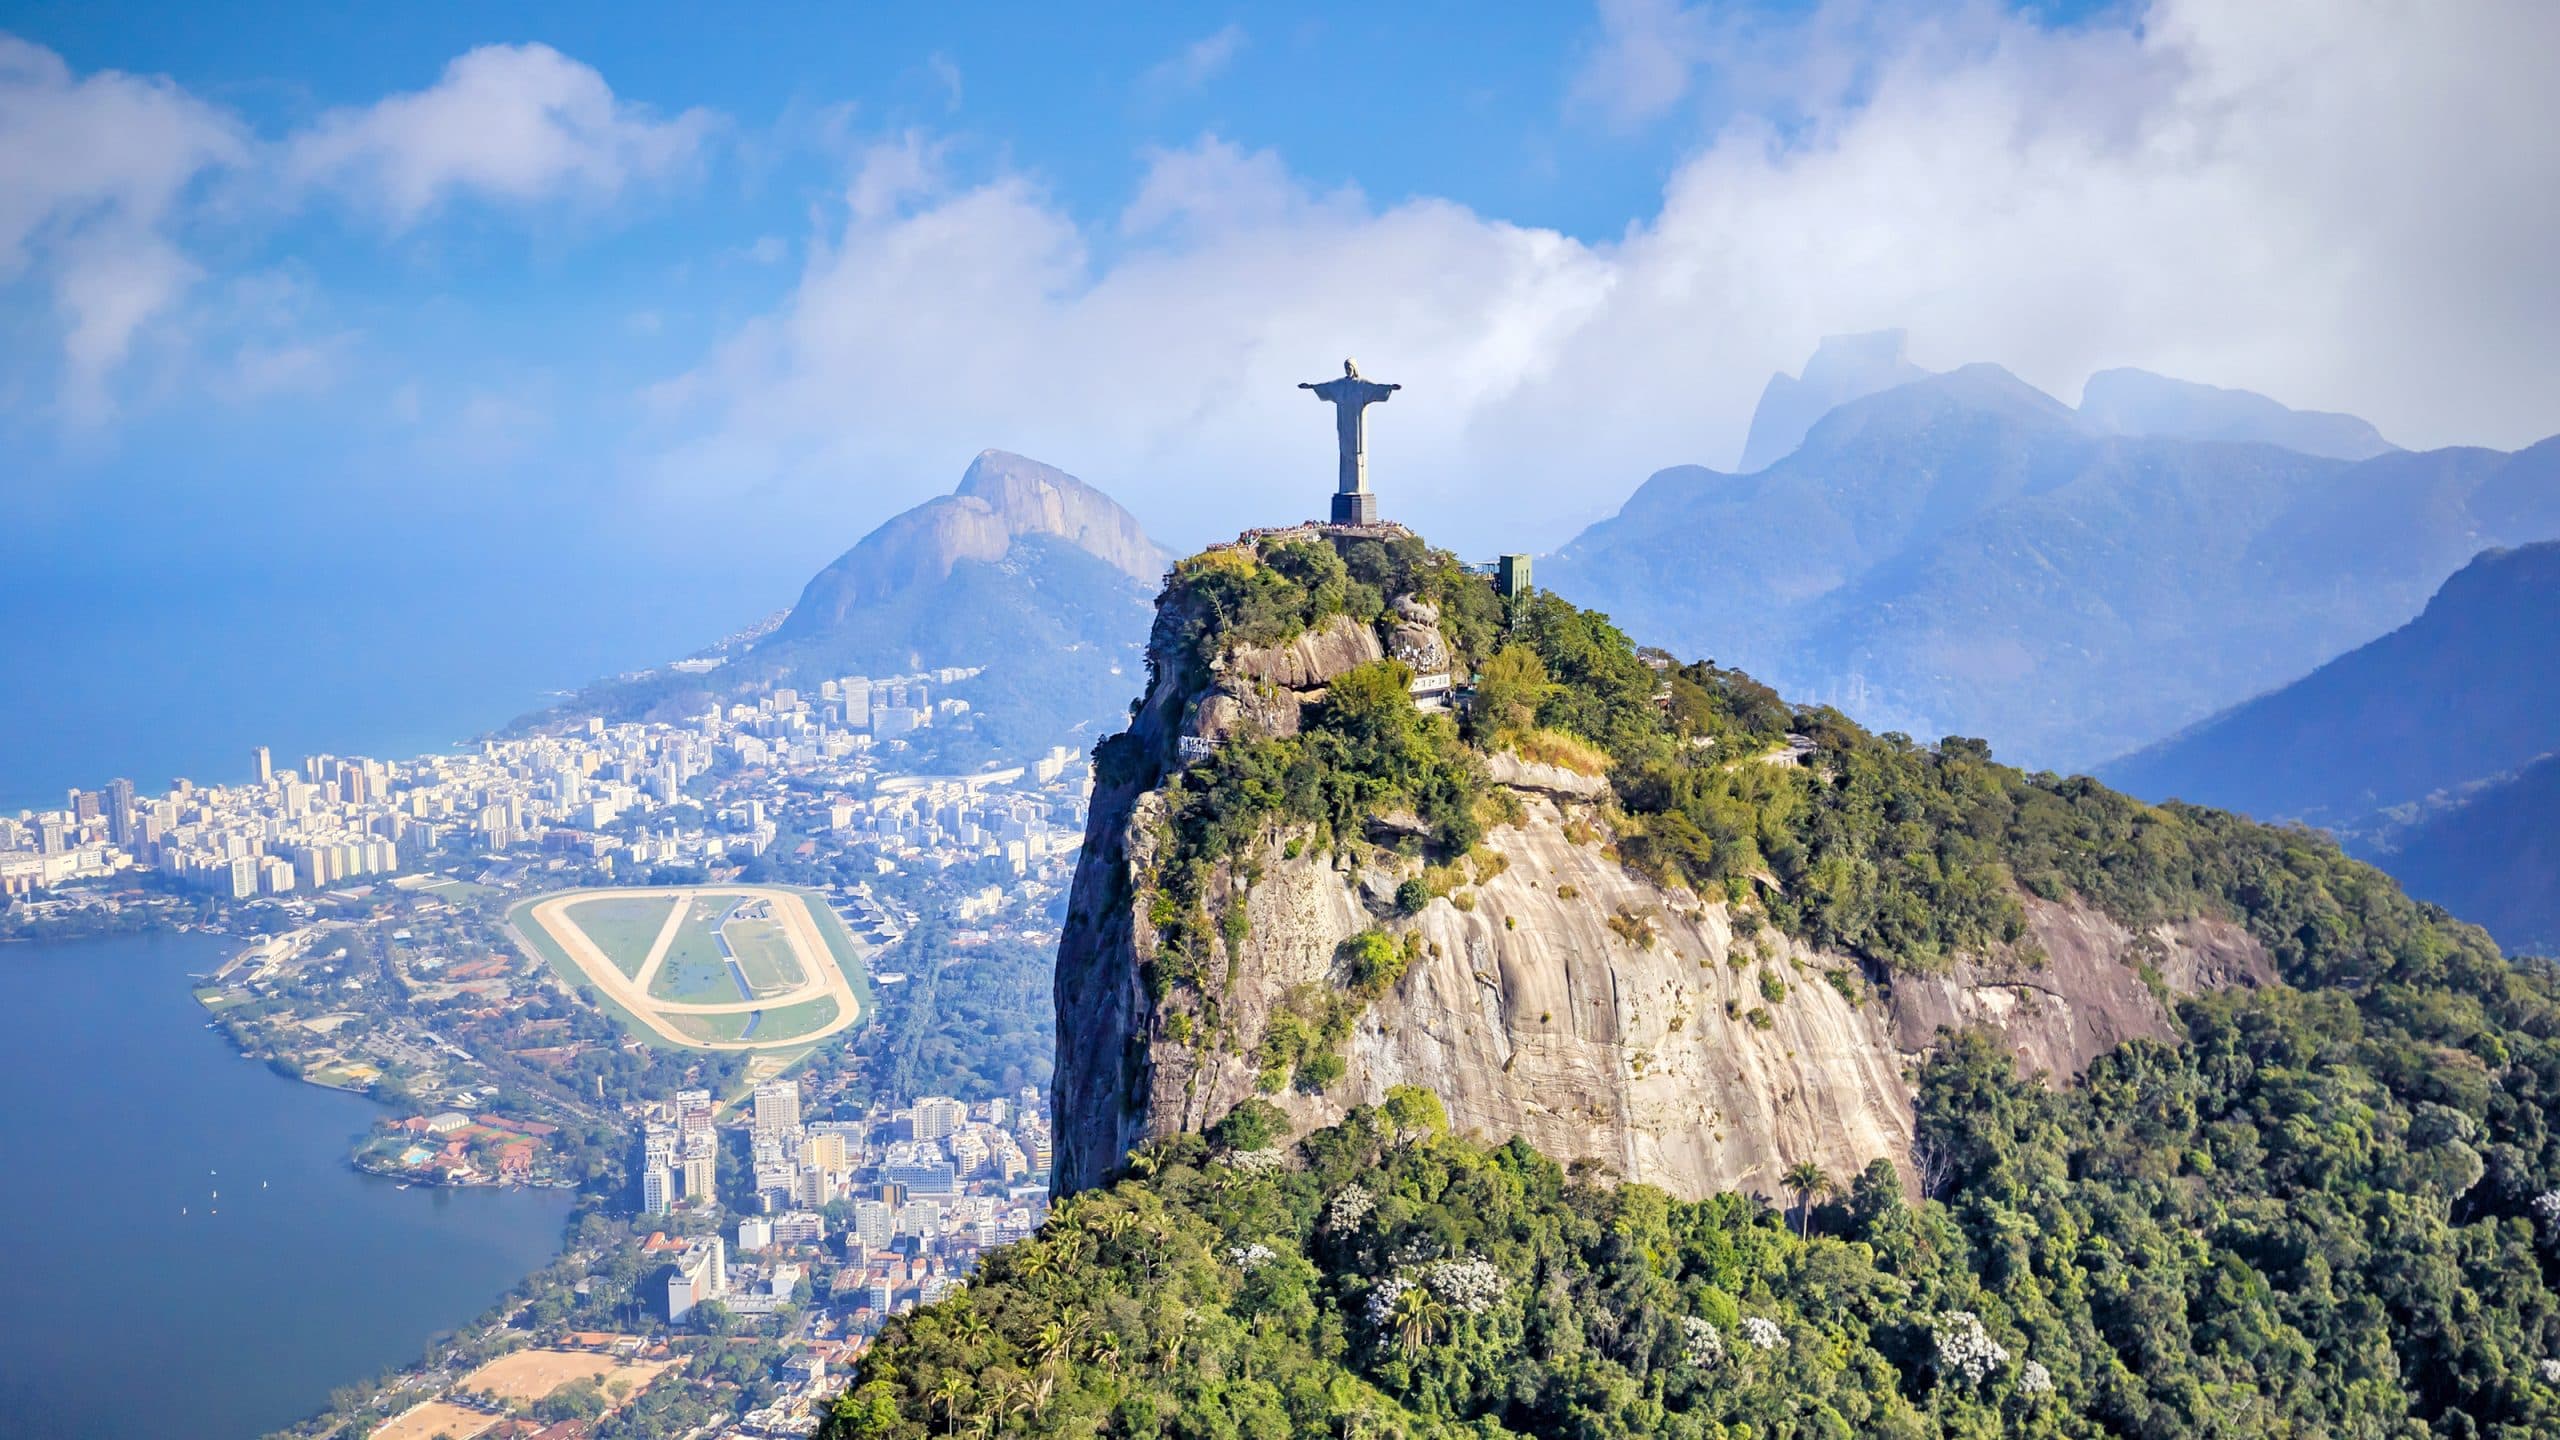 Prospect of new legislation in Brazil boosts crypto purchases